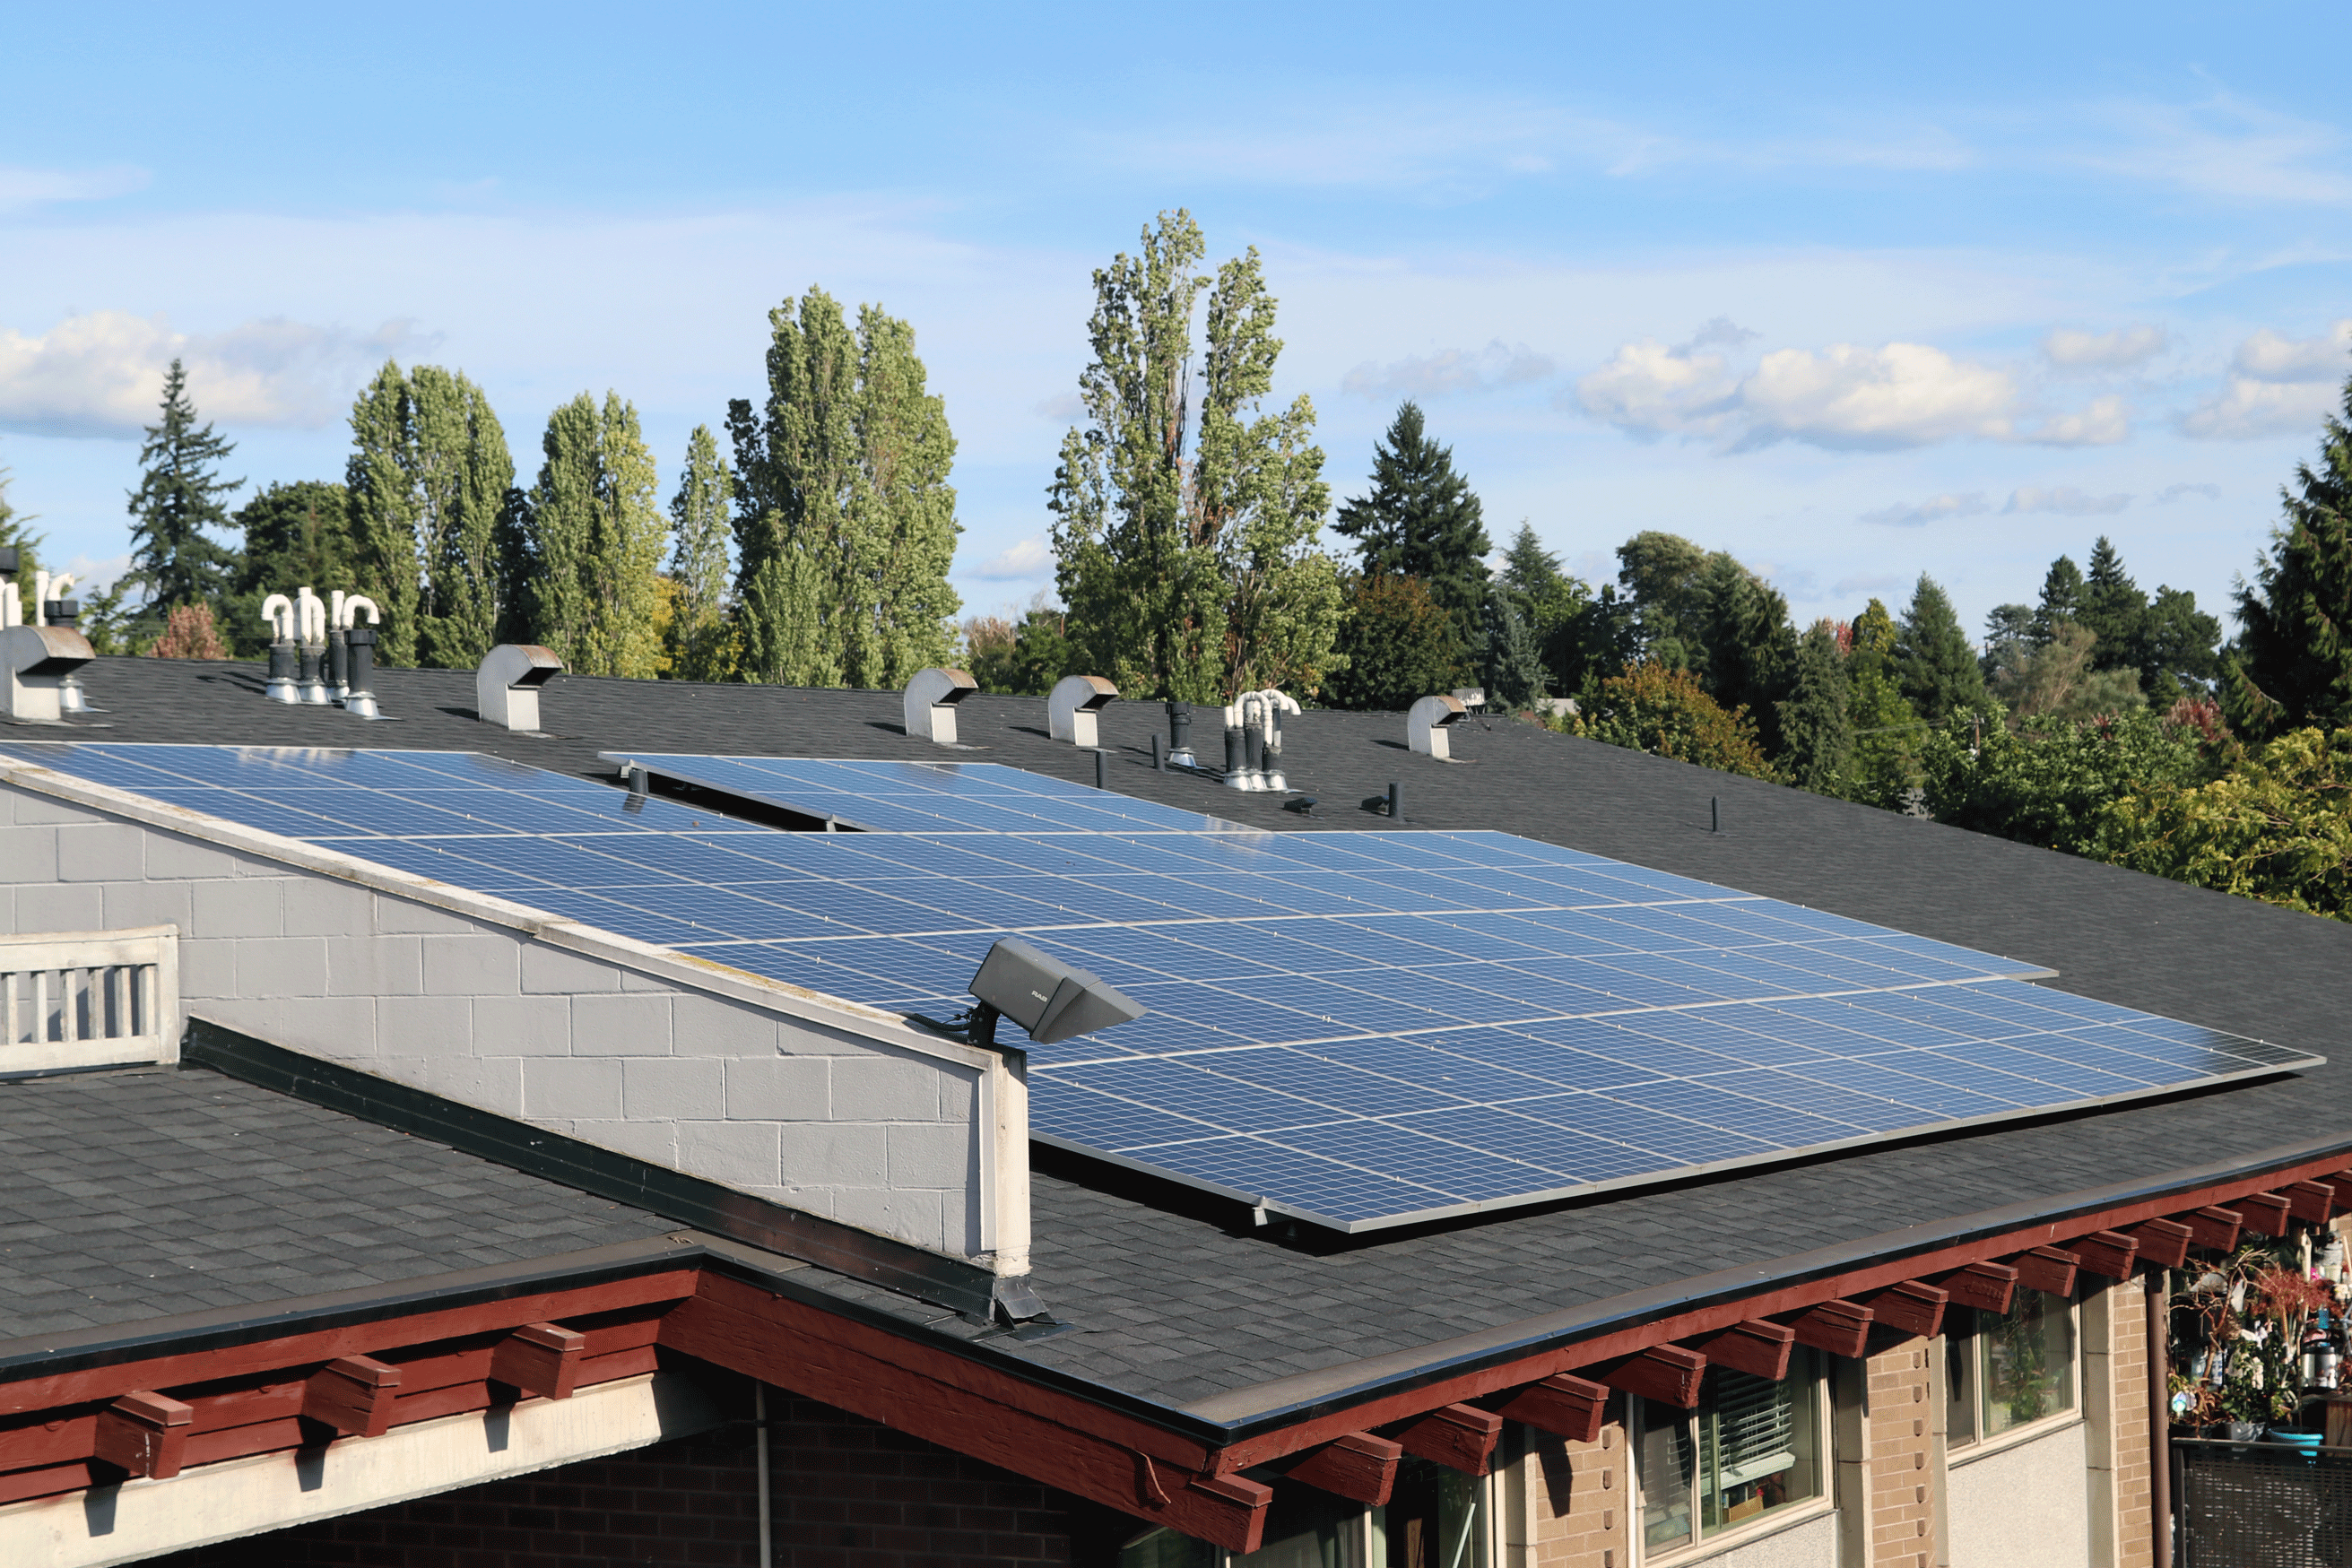 Solar panel installation on roof with trees in background.